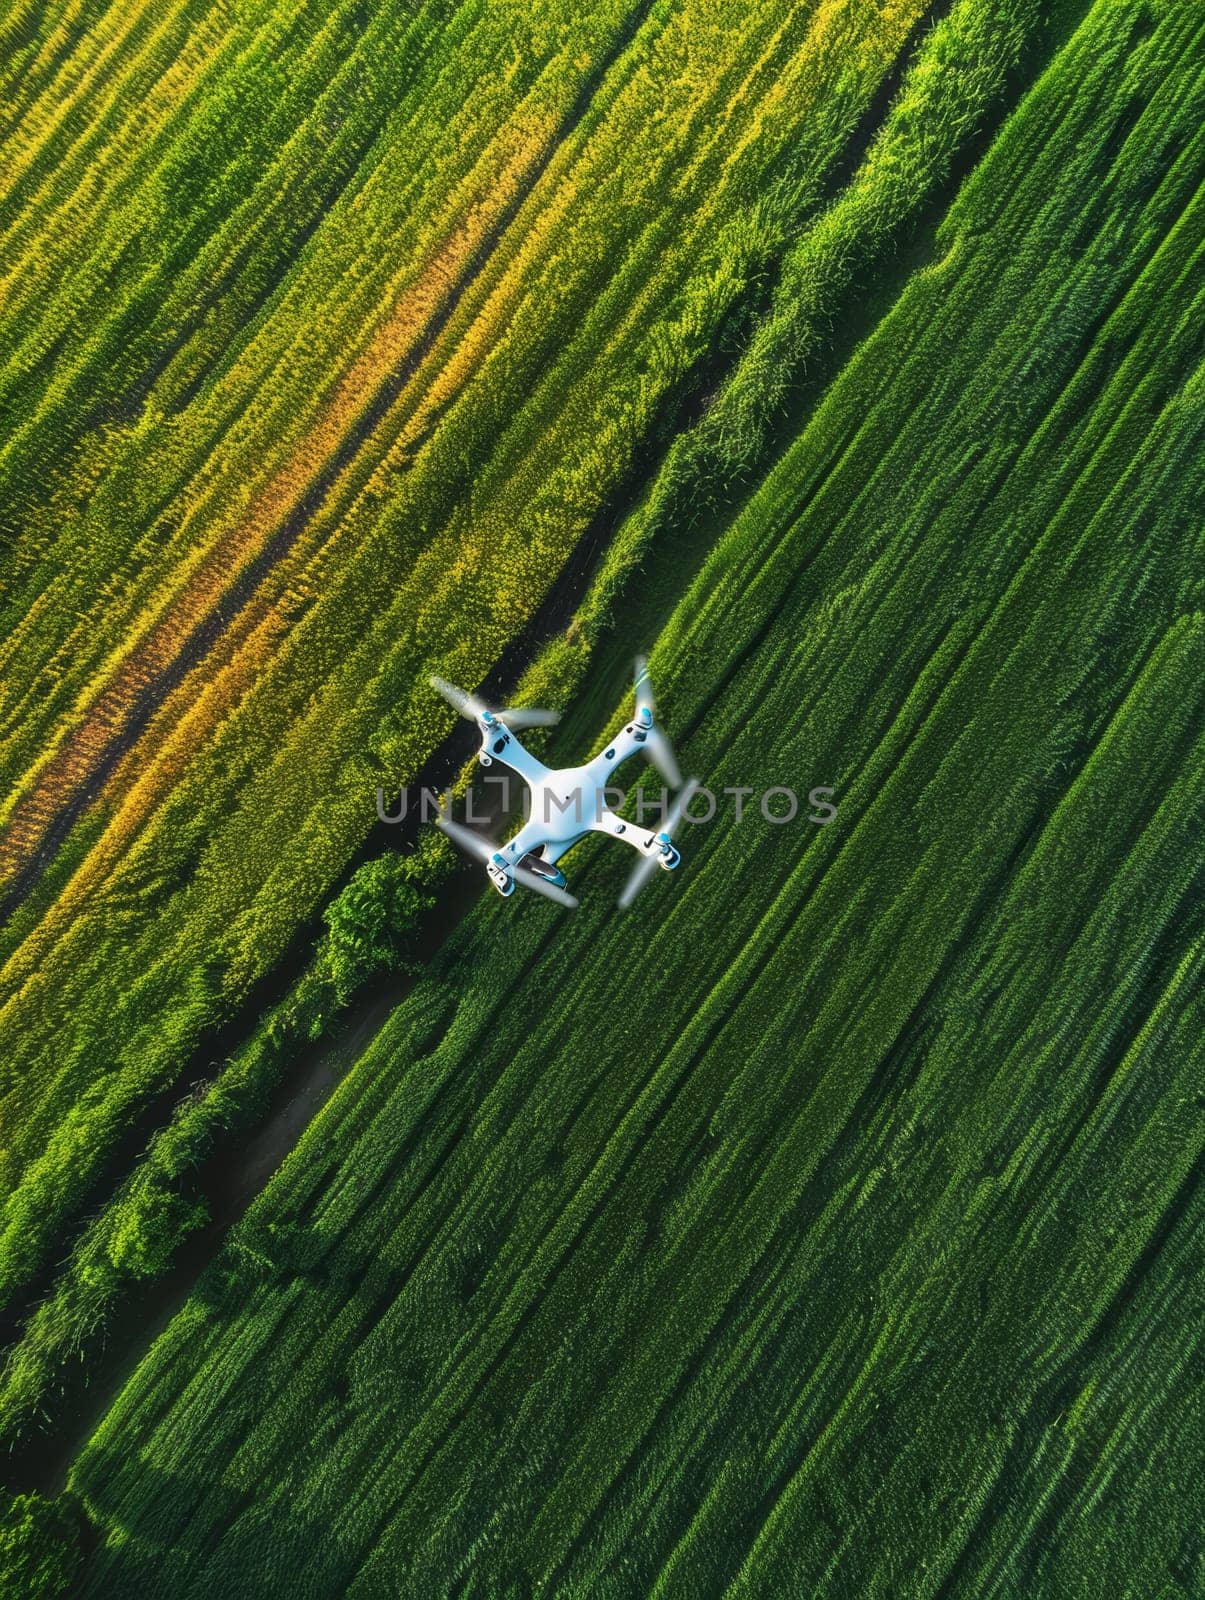 A bird's-eye view of a drone flying over cultivated fields, showcasing the intersection of modern technology with traditional agriculture. The vivid green hues speak to fertility within the farmland. by sfinks